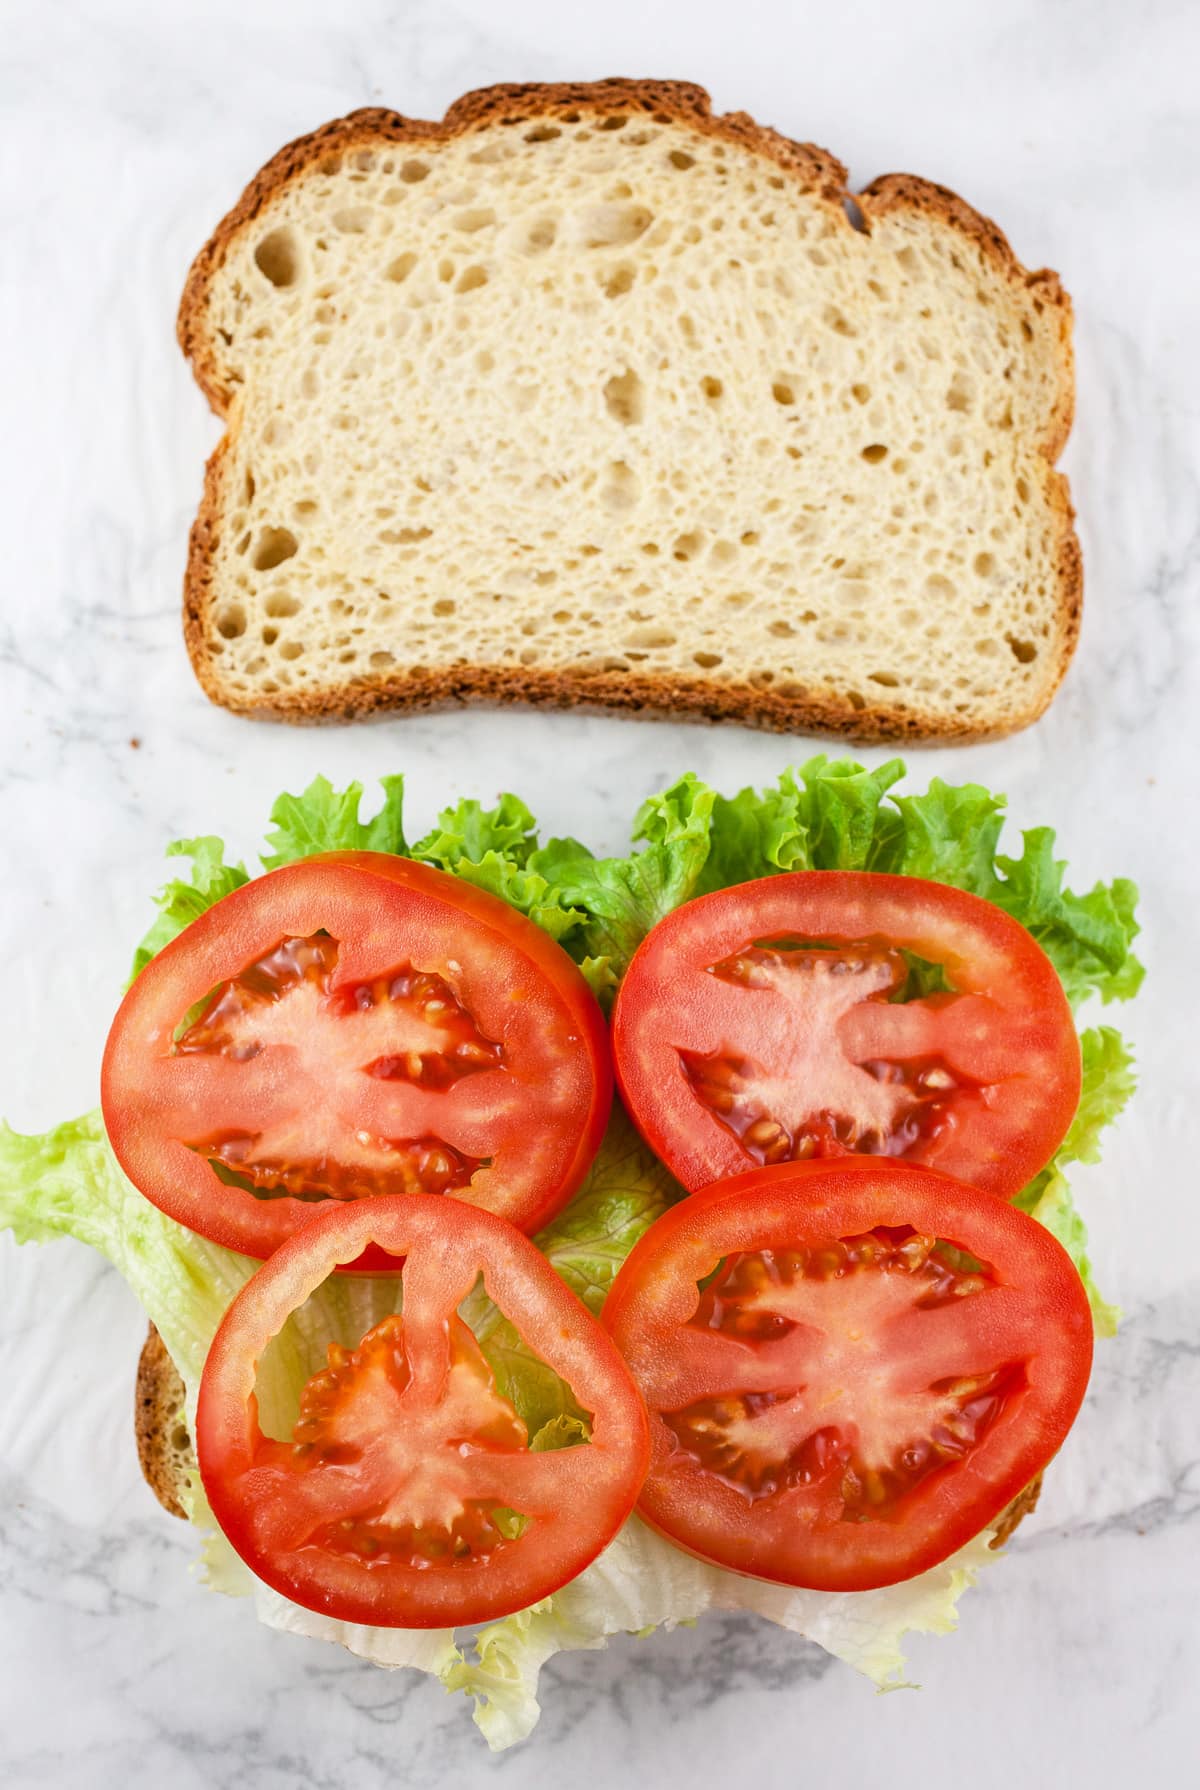 Bread slices with lettuce and sliced tomatoes.